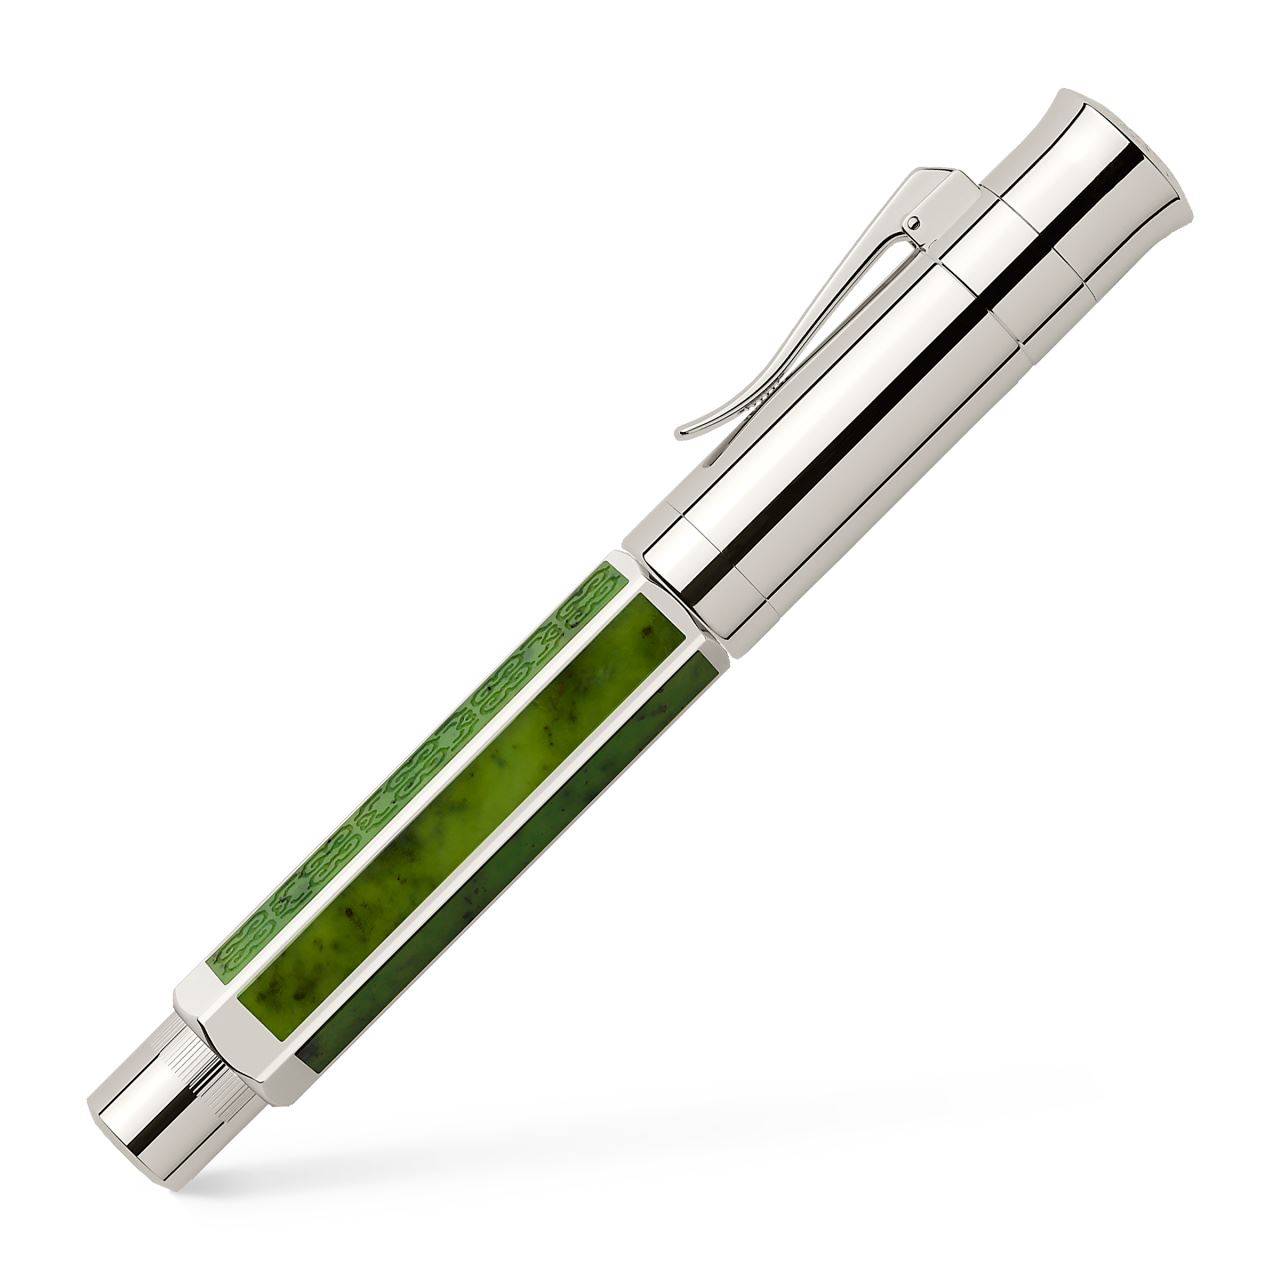 Graf-von-Faber-Castell - Fountain pen Pen of the Year 2011 Broad